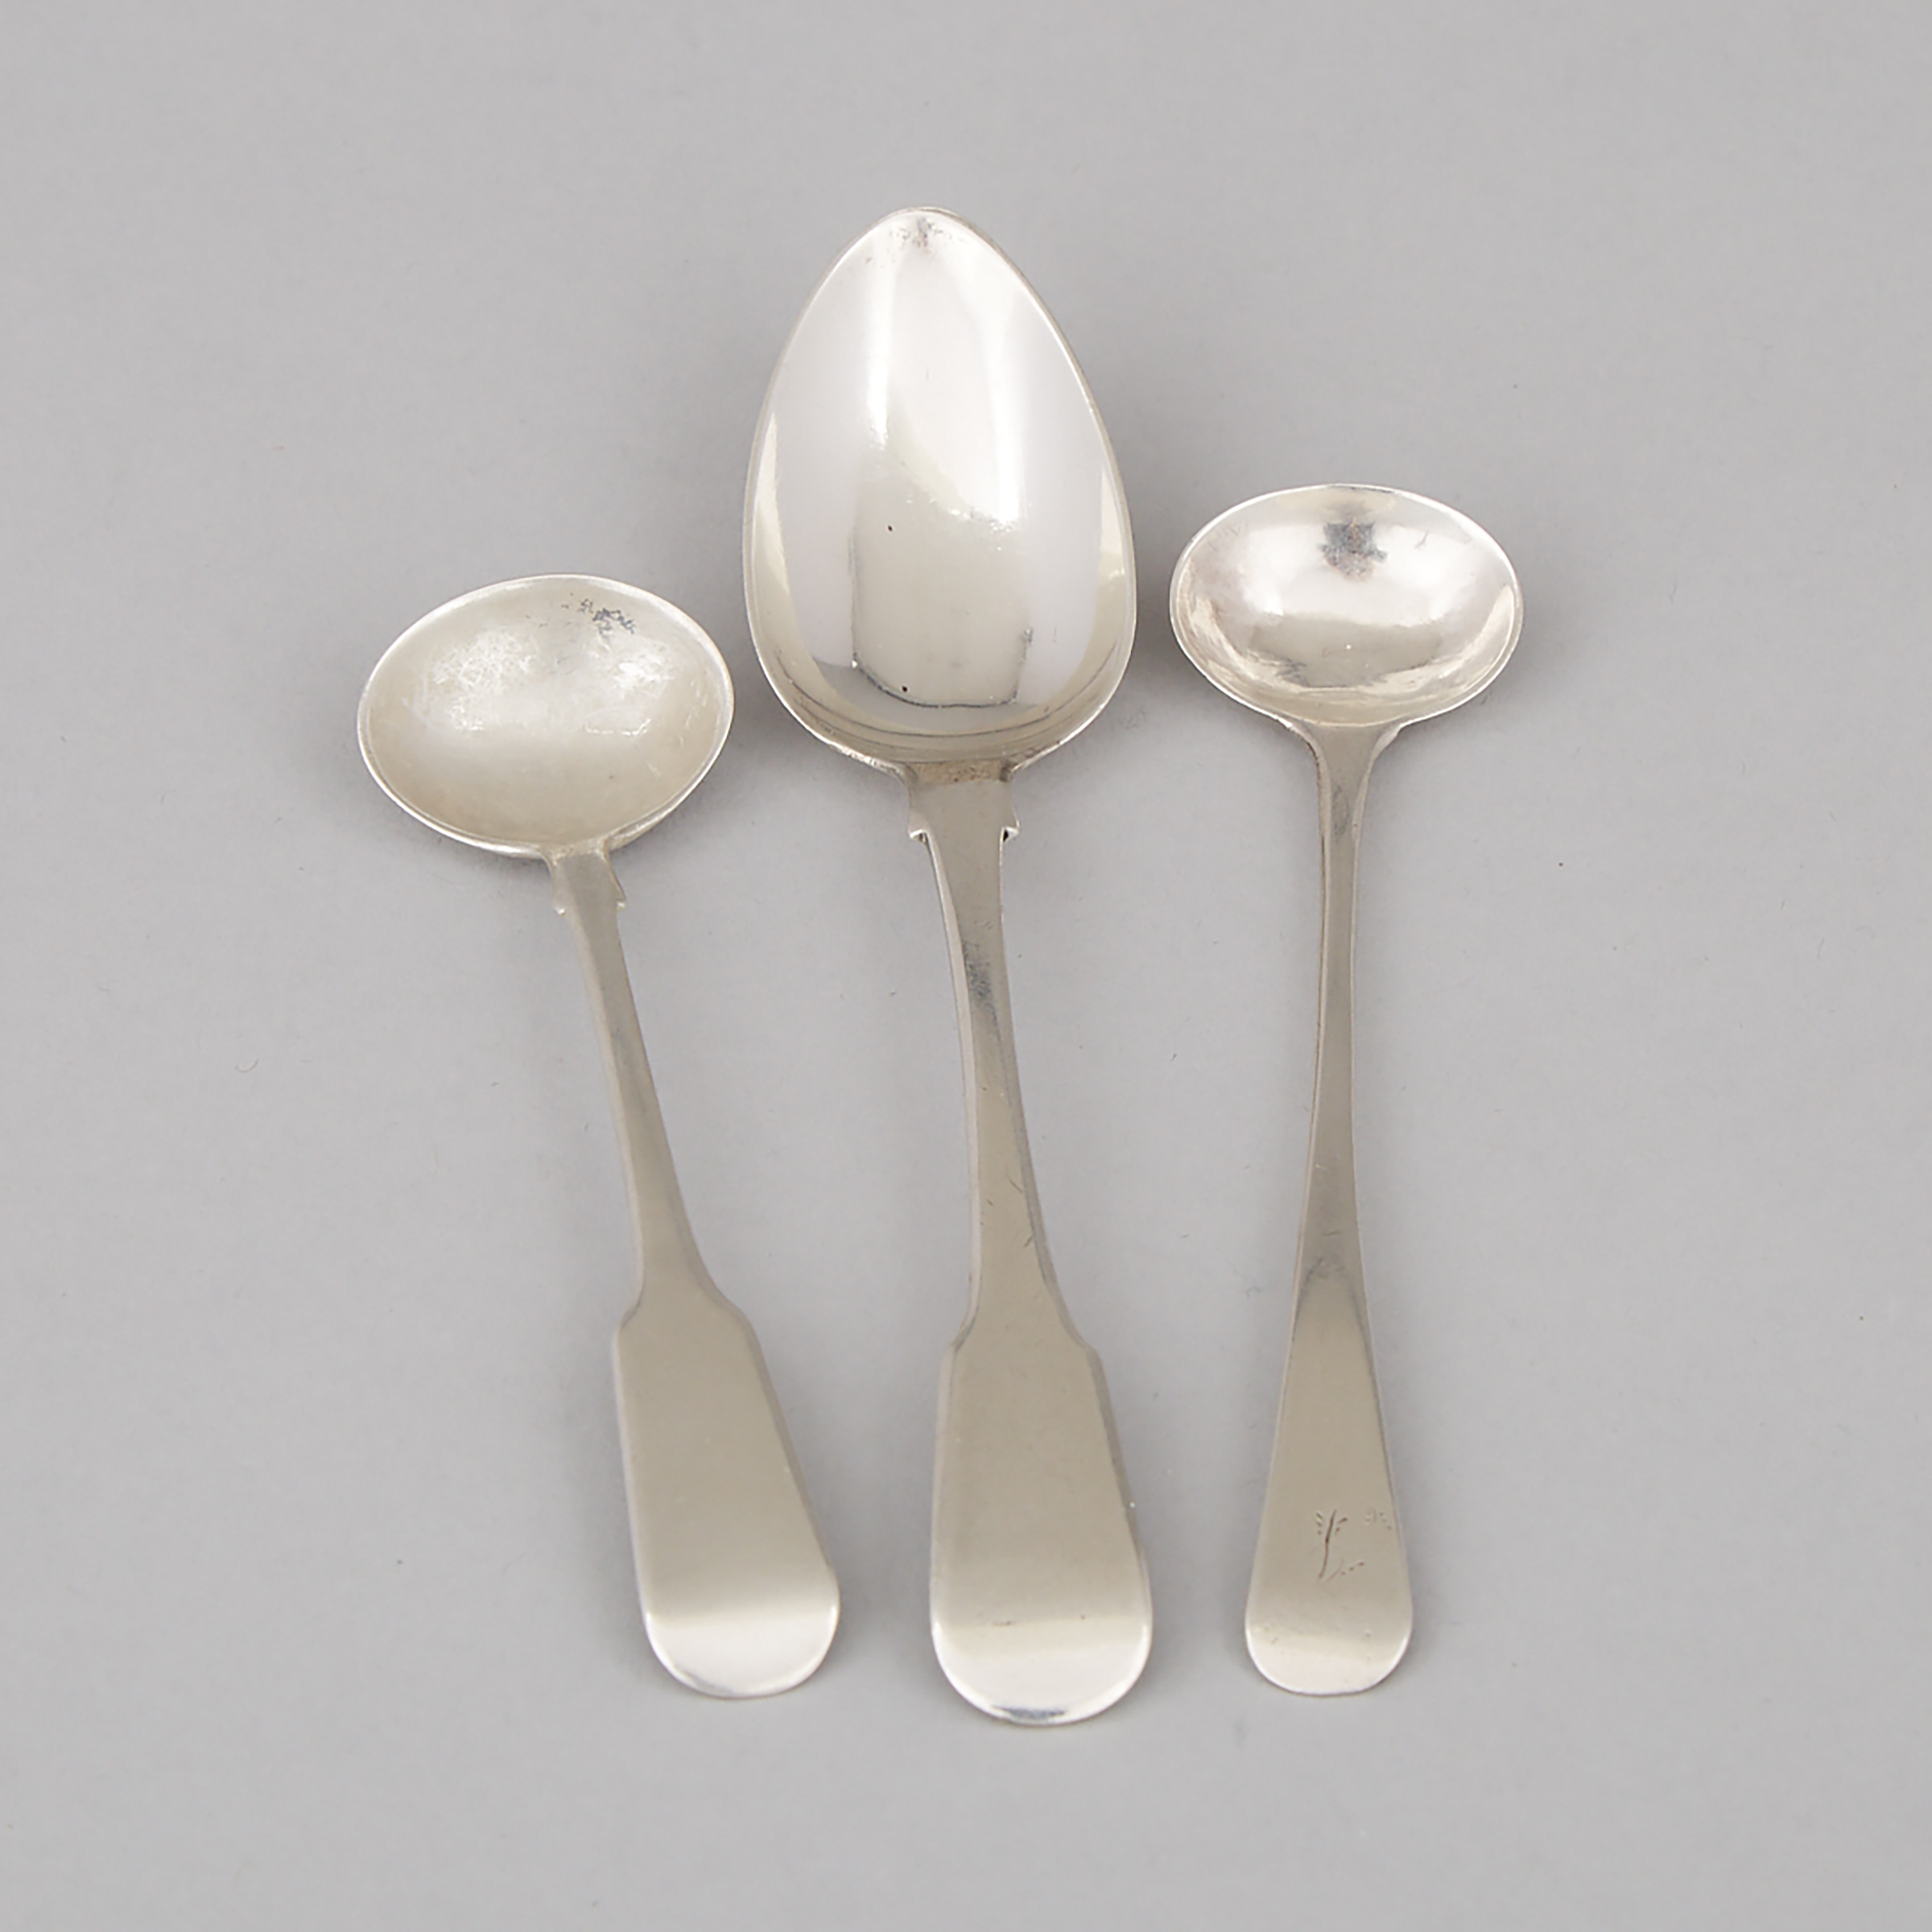 Canadian Silver Tea Spoon, Larent Amiot, and Two Salt Spoons, Michel Fortin and James Smellie, Quebec City, Que., early 19th century